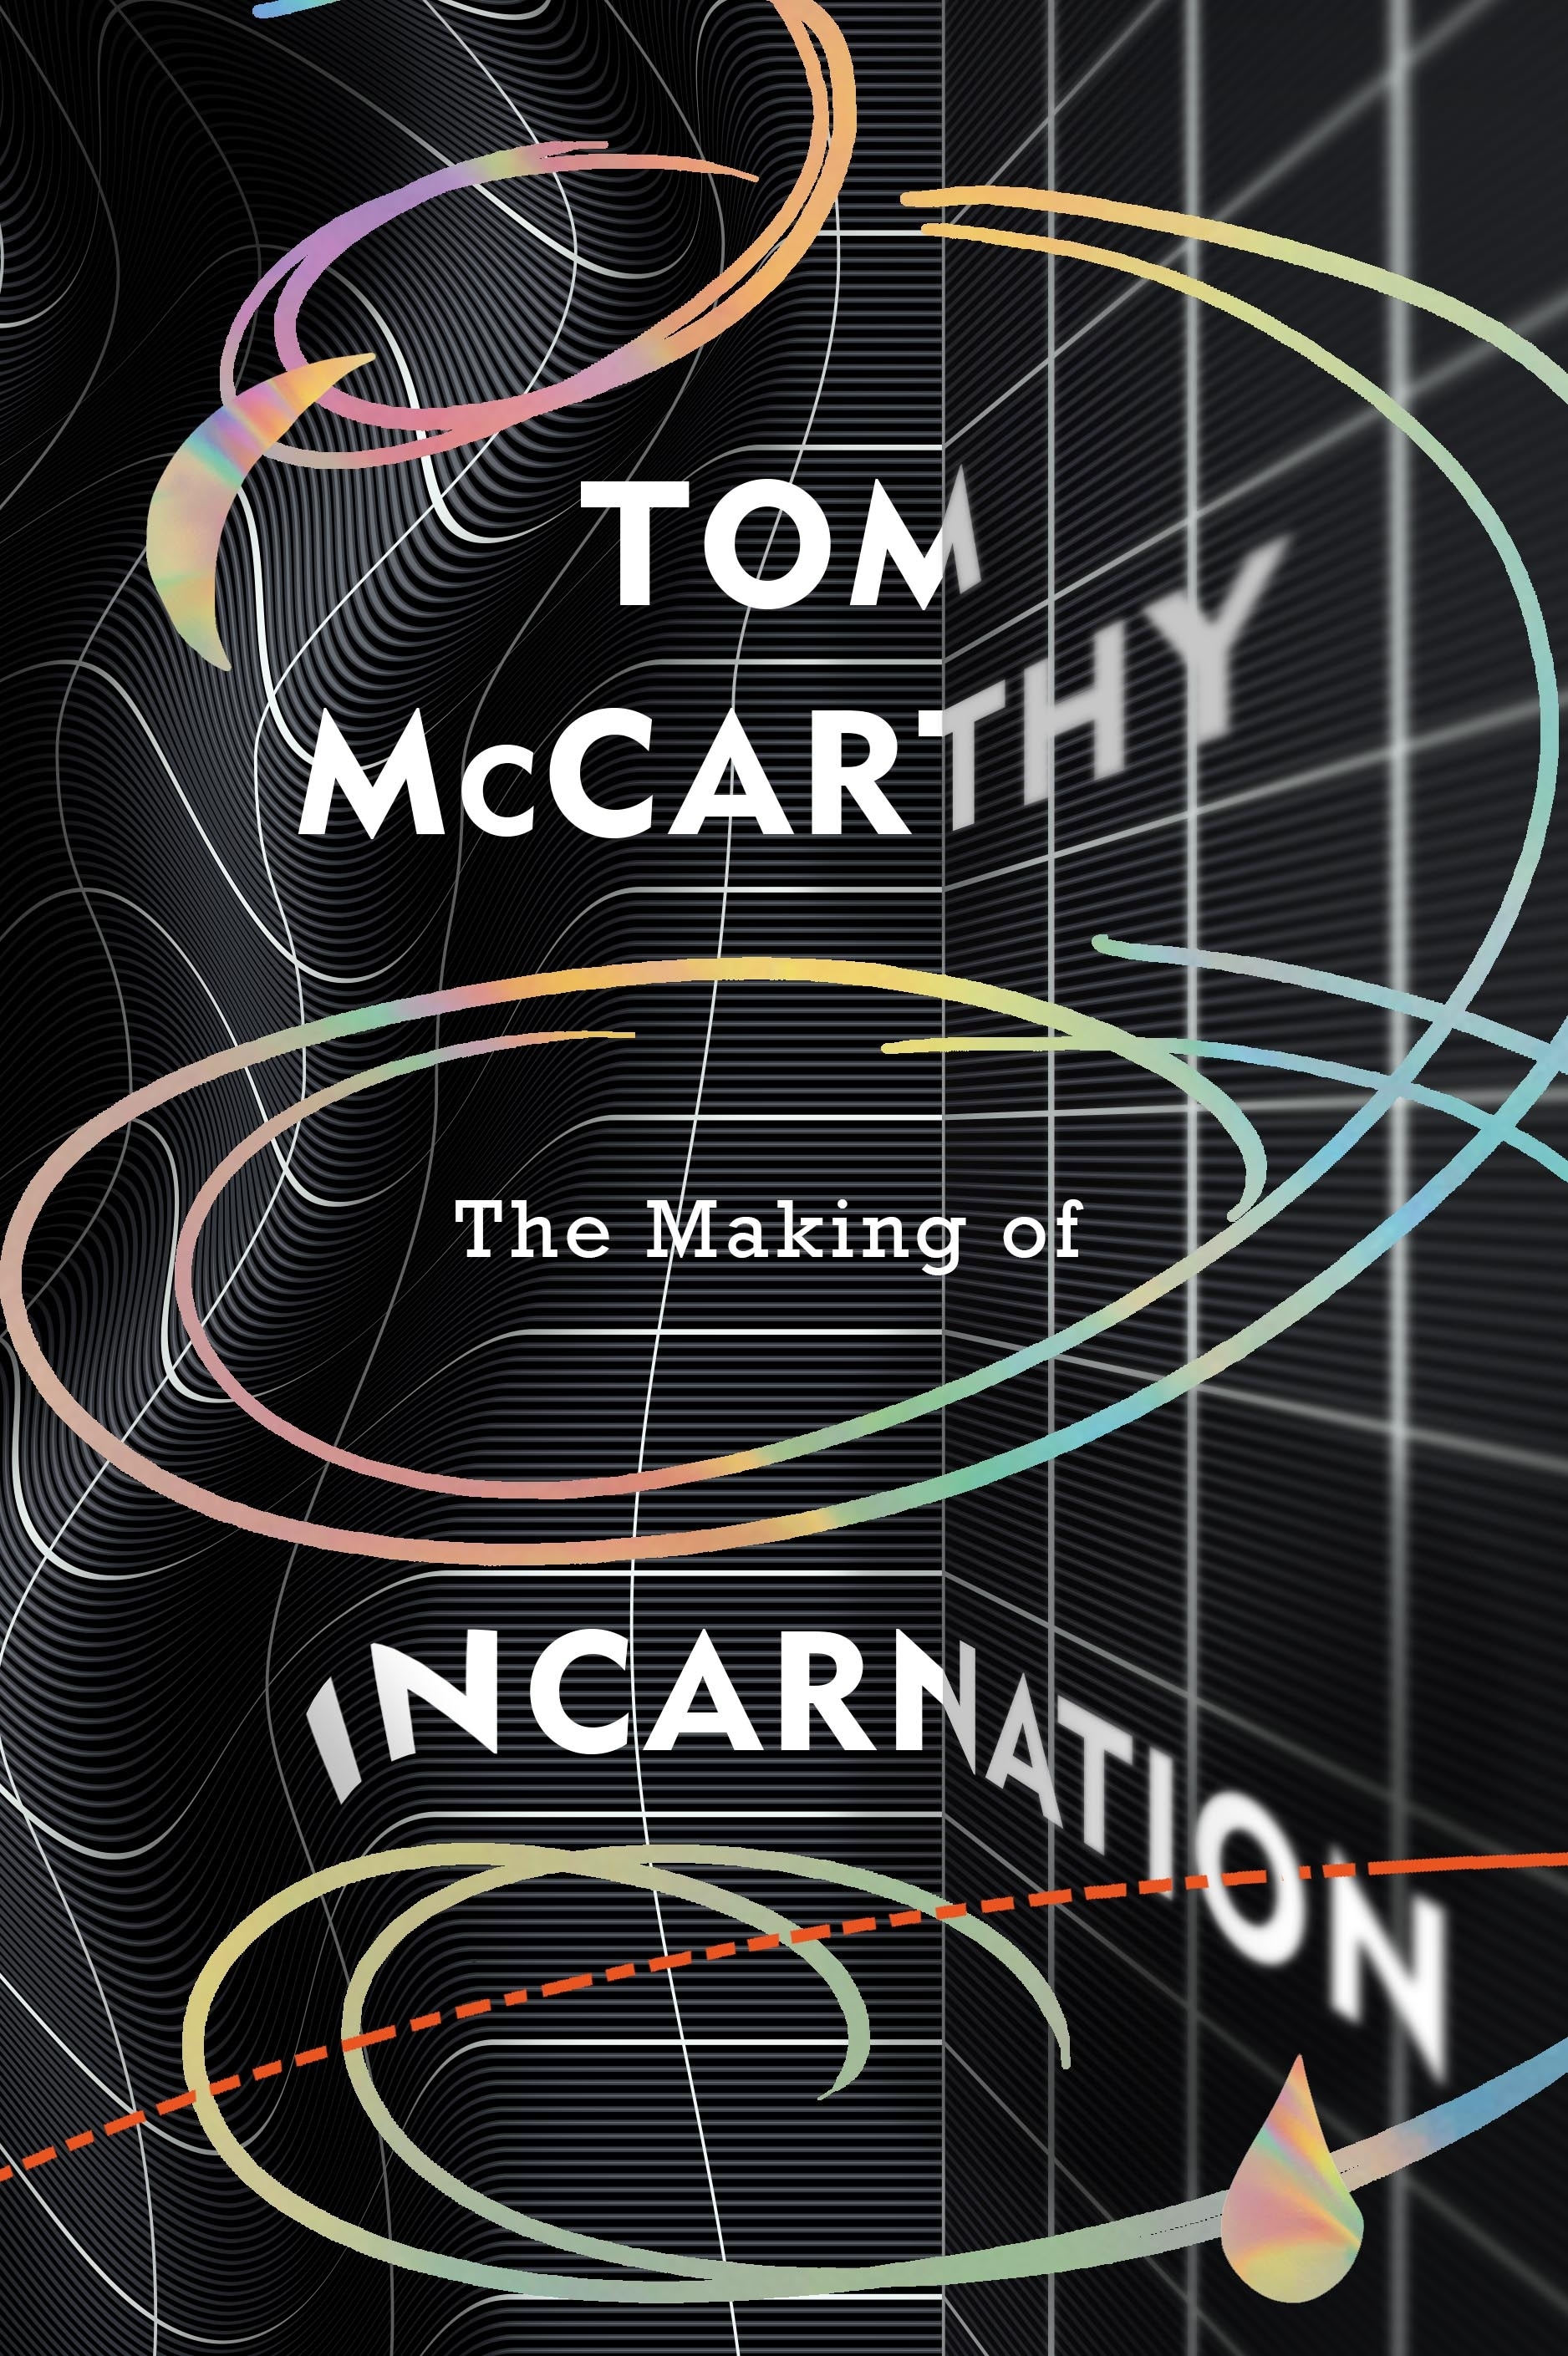 Book “The Making of Incarnation” by Tom McCarthy — September 16, 2021